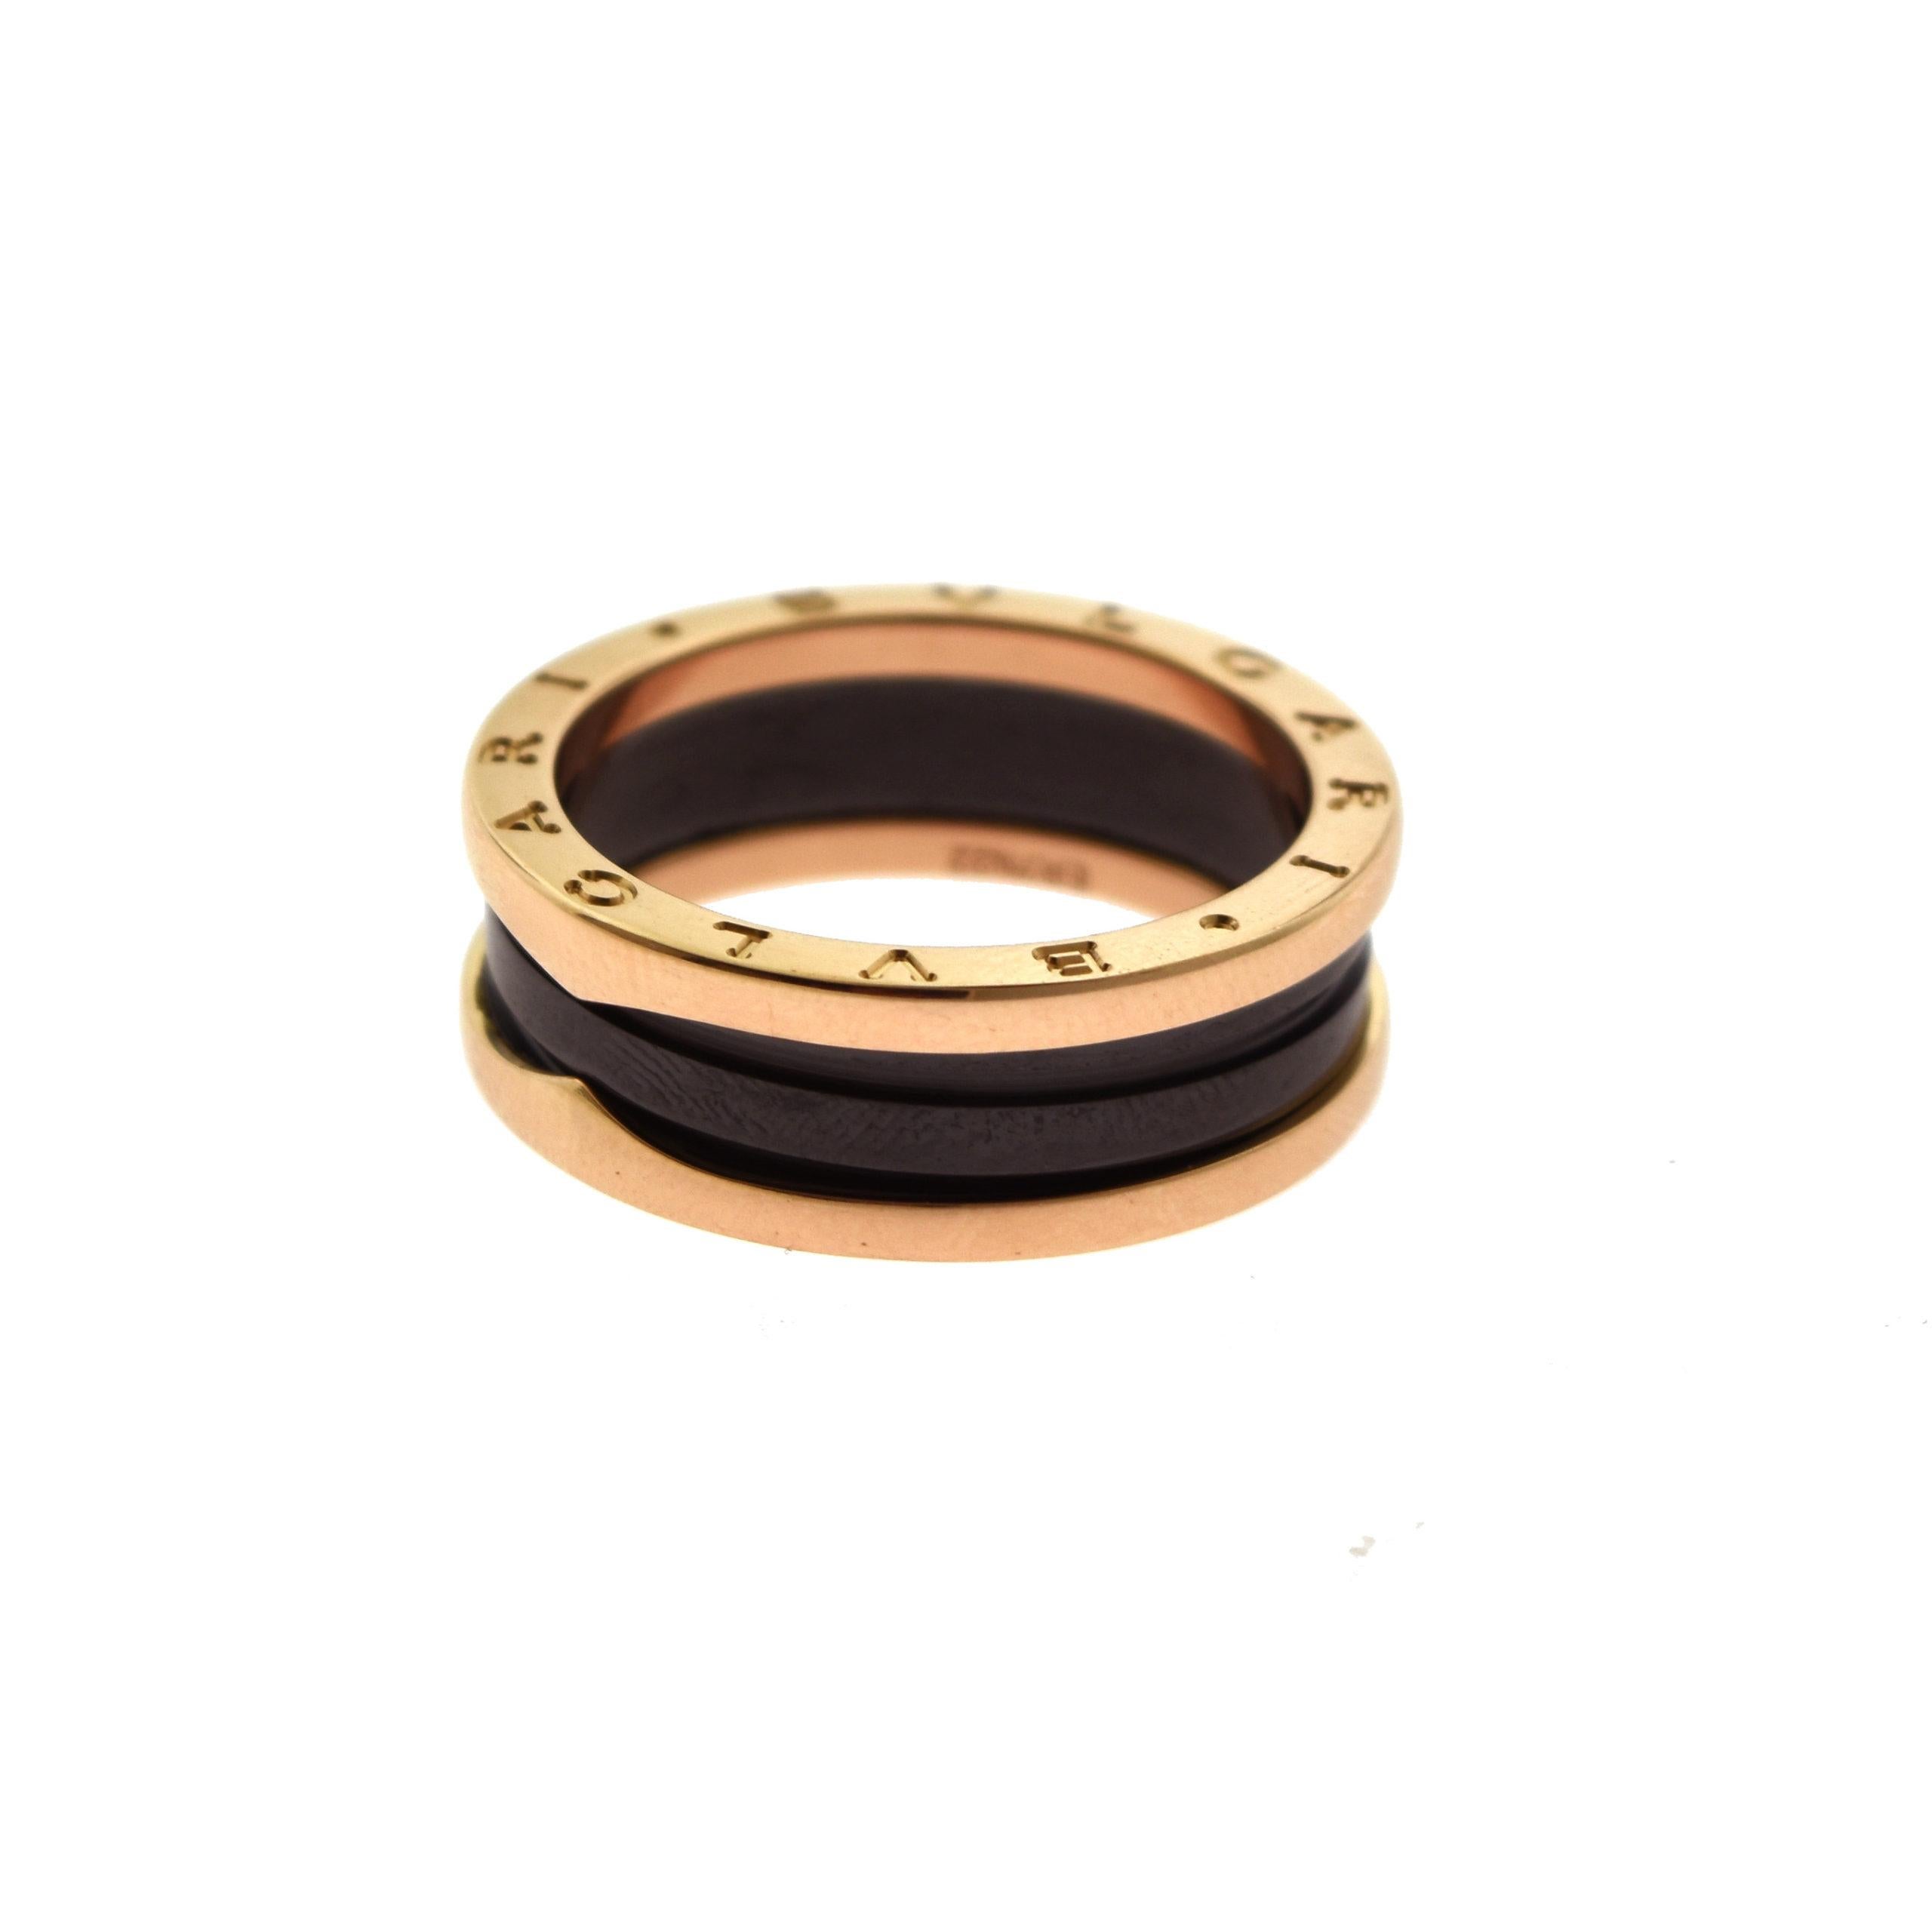 Brilliance Jewels, Miami
Questions? Call Us Anytime!
786,482,8100

Ring Size: 64 (Euro); 10.75(US)

Designer: Bvlgari

Collection: B.Zero1

Style: Ring

Metal: Rose Gold; Black Ceramic

Metal Purity: 18k 

Band Measurments: Approx. 8.37 mm x 3.85